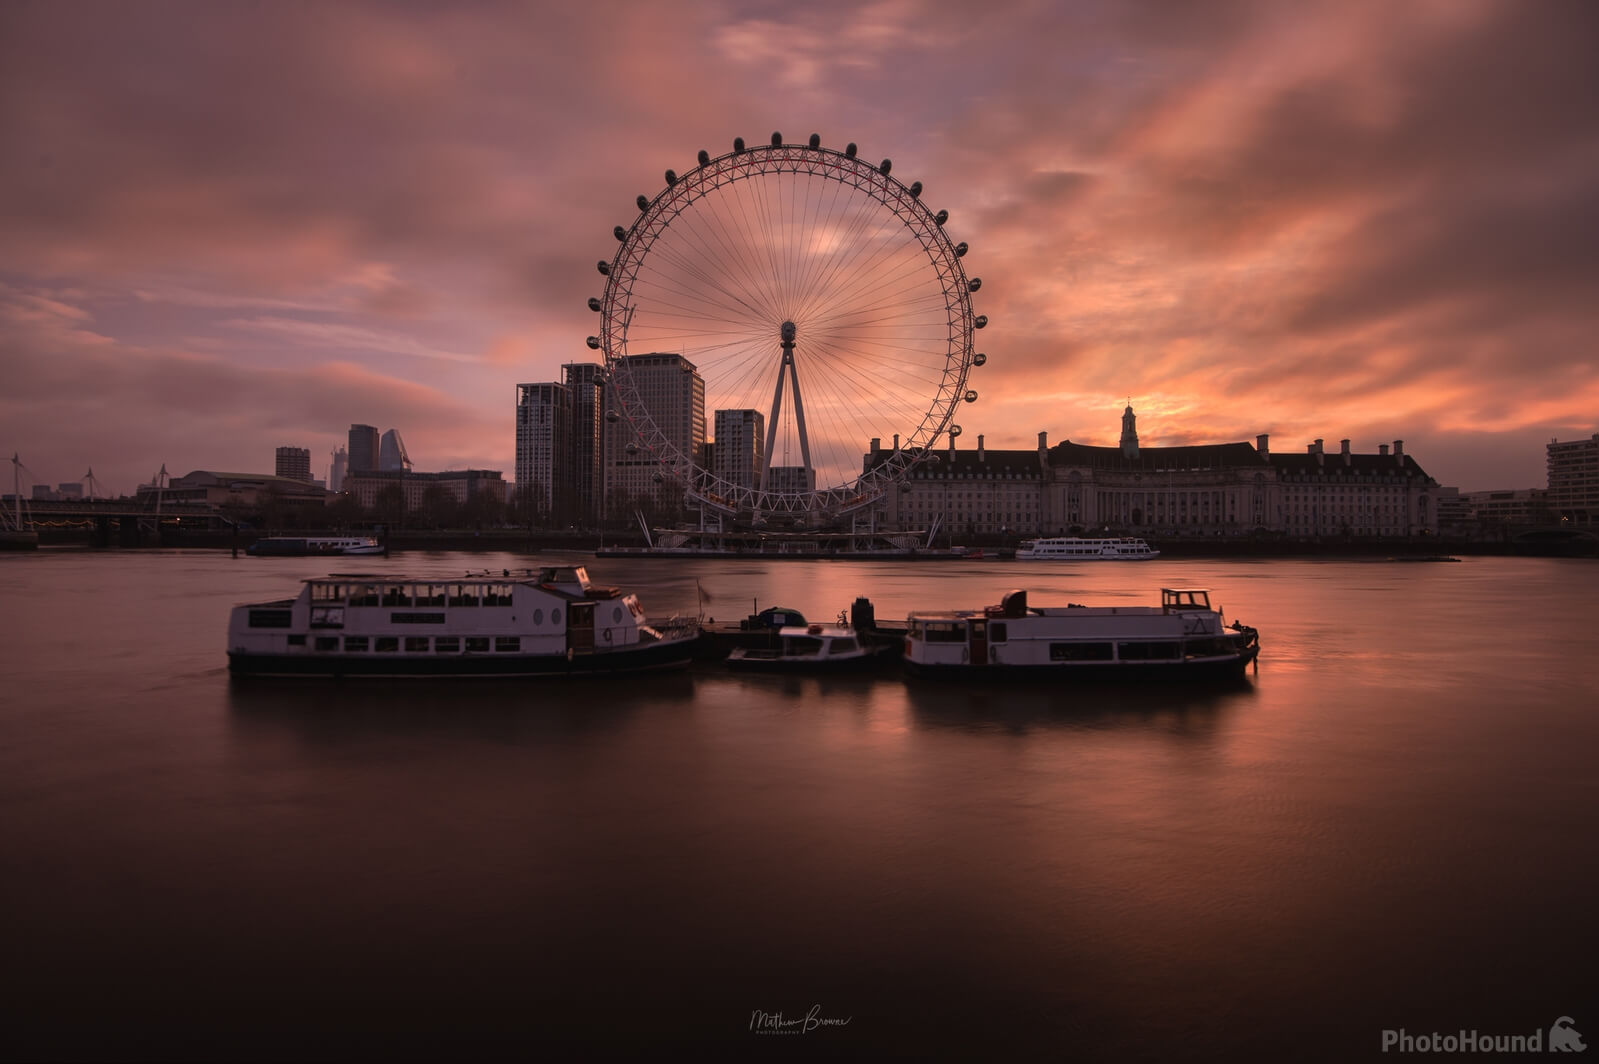 Image of London Eye from Victoria Embankment by Mathew Browne